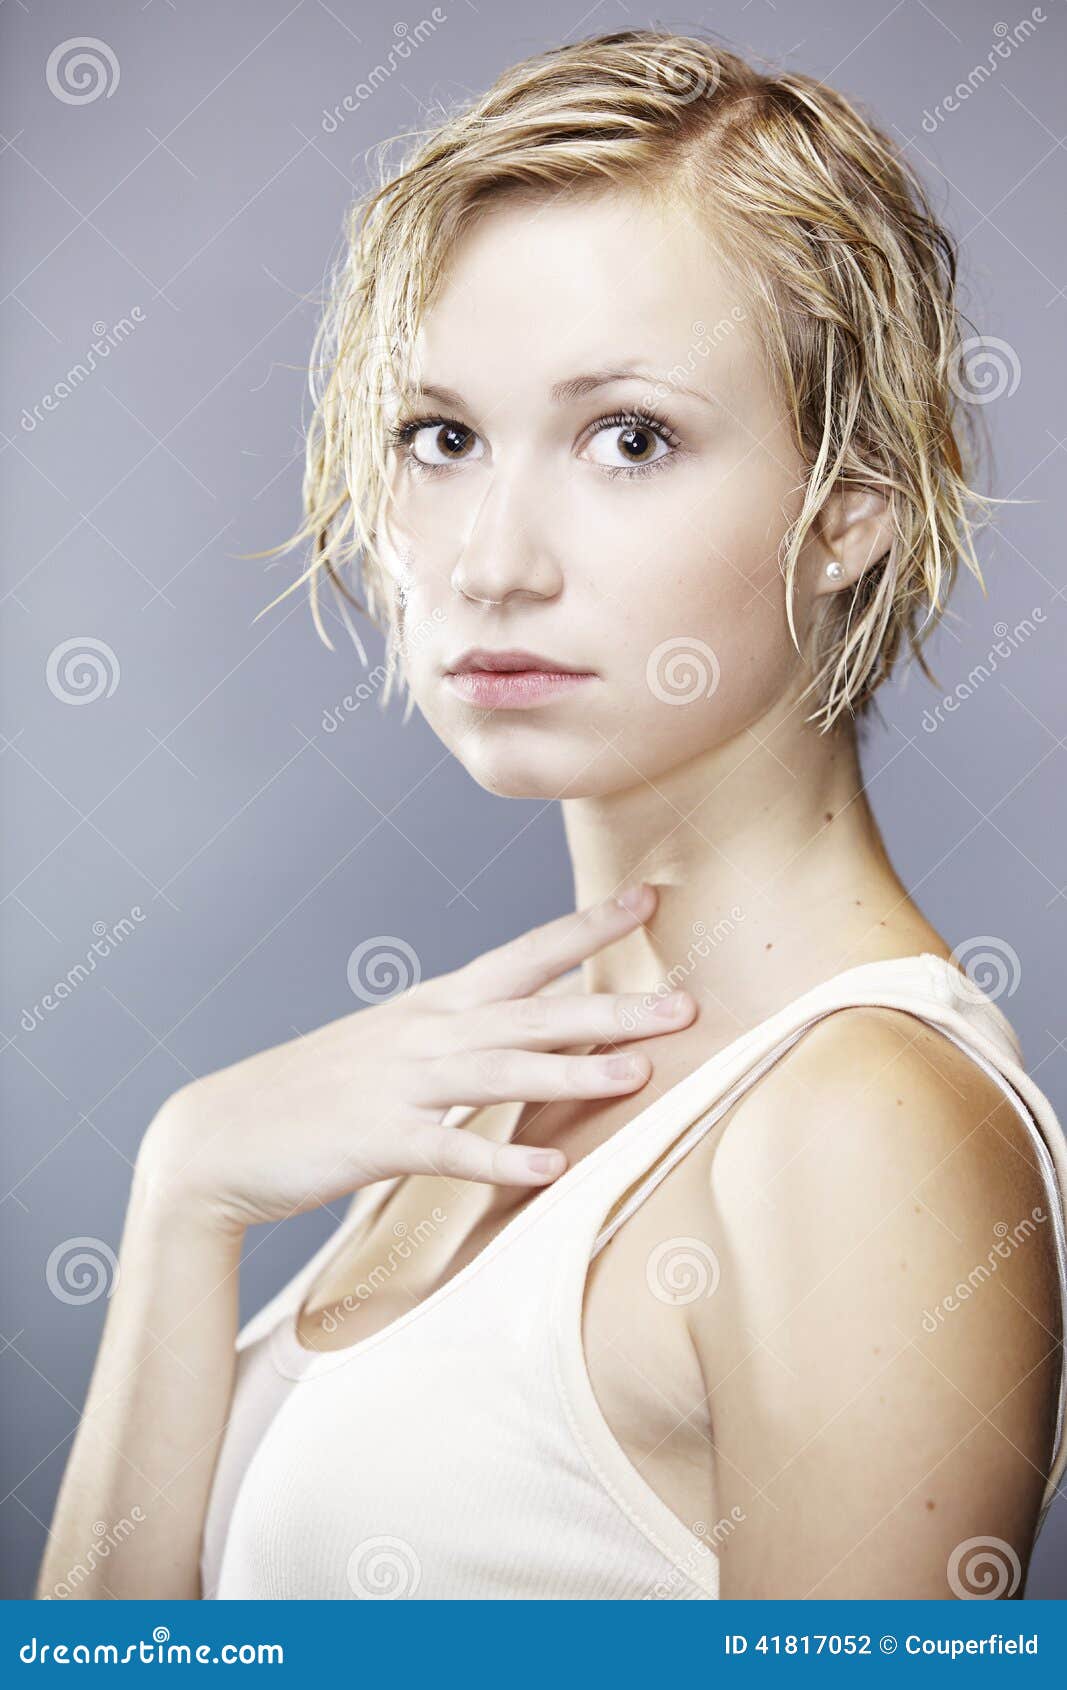 Dirty And Wet Pretty Woman Stock Photo Image Of Nice 41817052